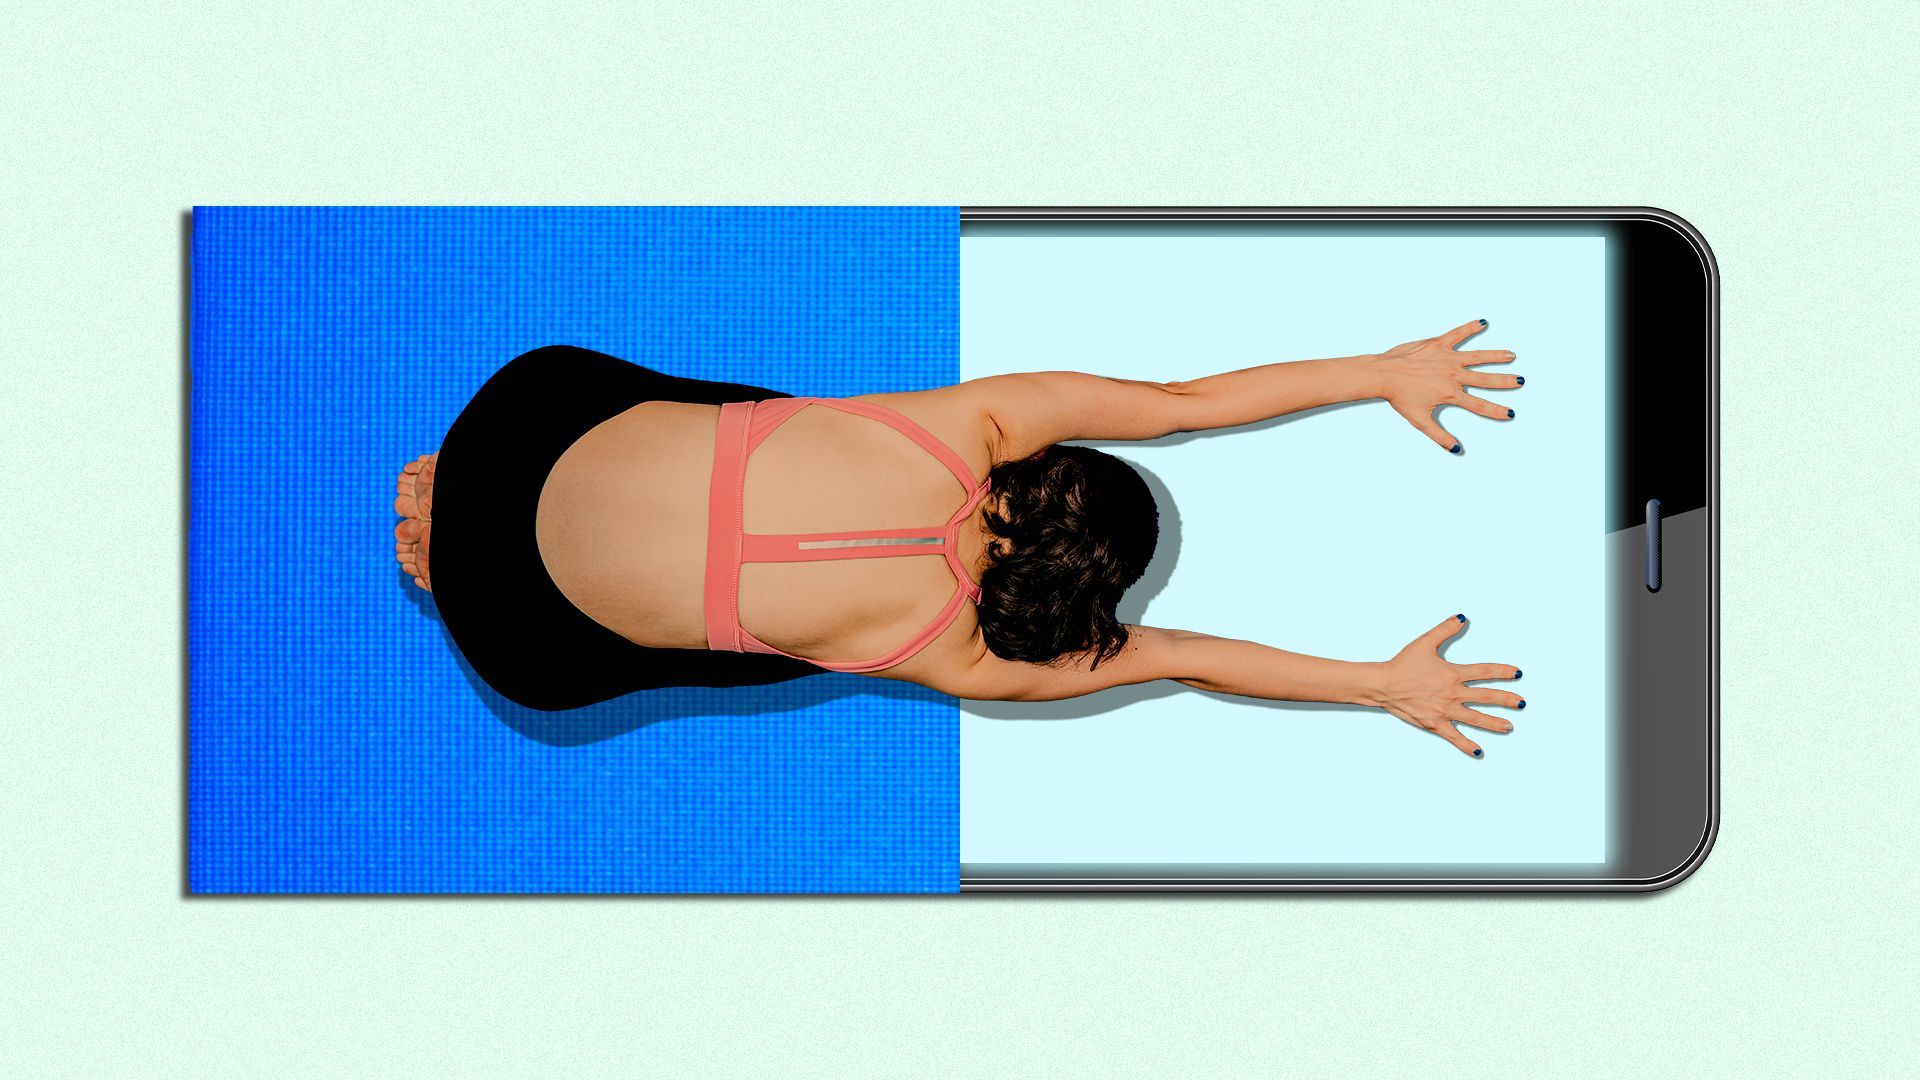 Illustration of a woman doing yoga on mat that is half a cellphone